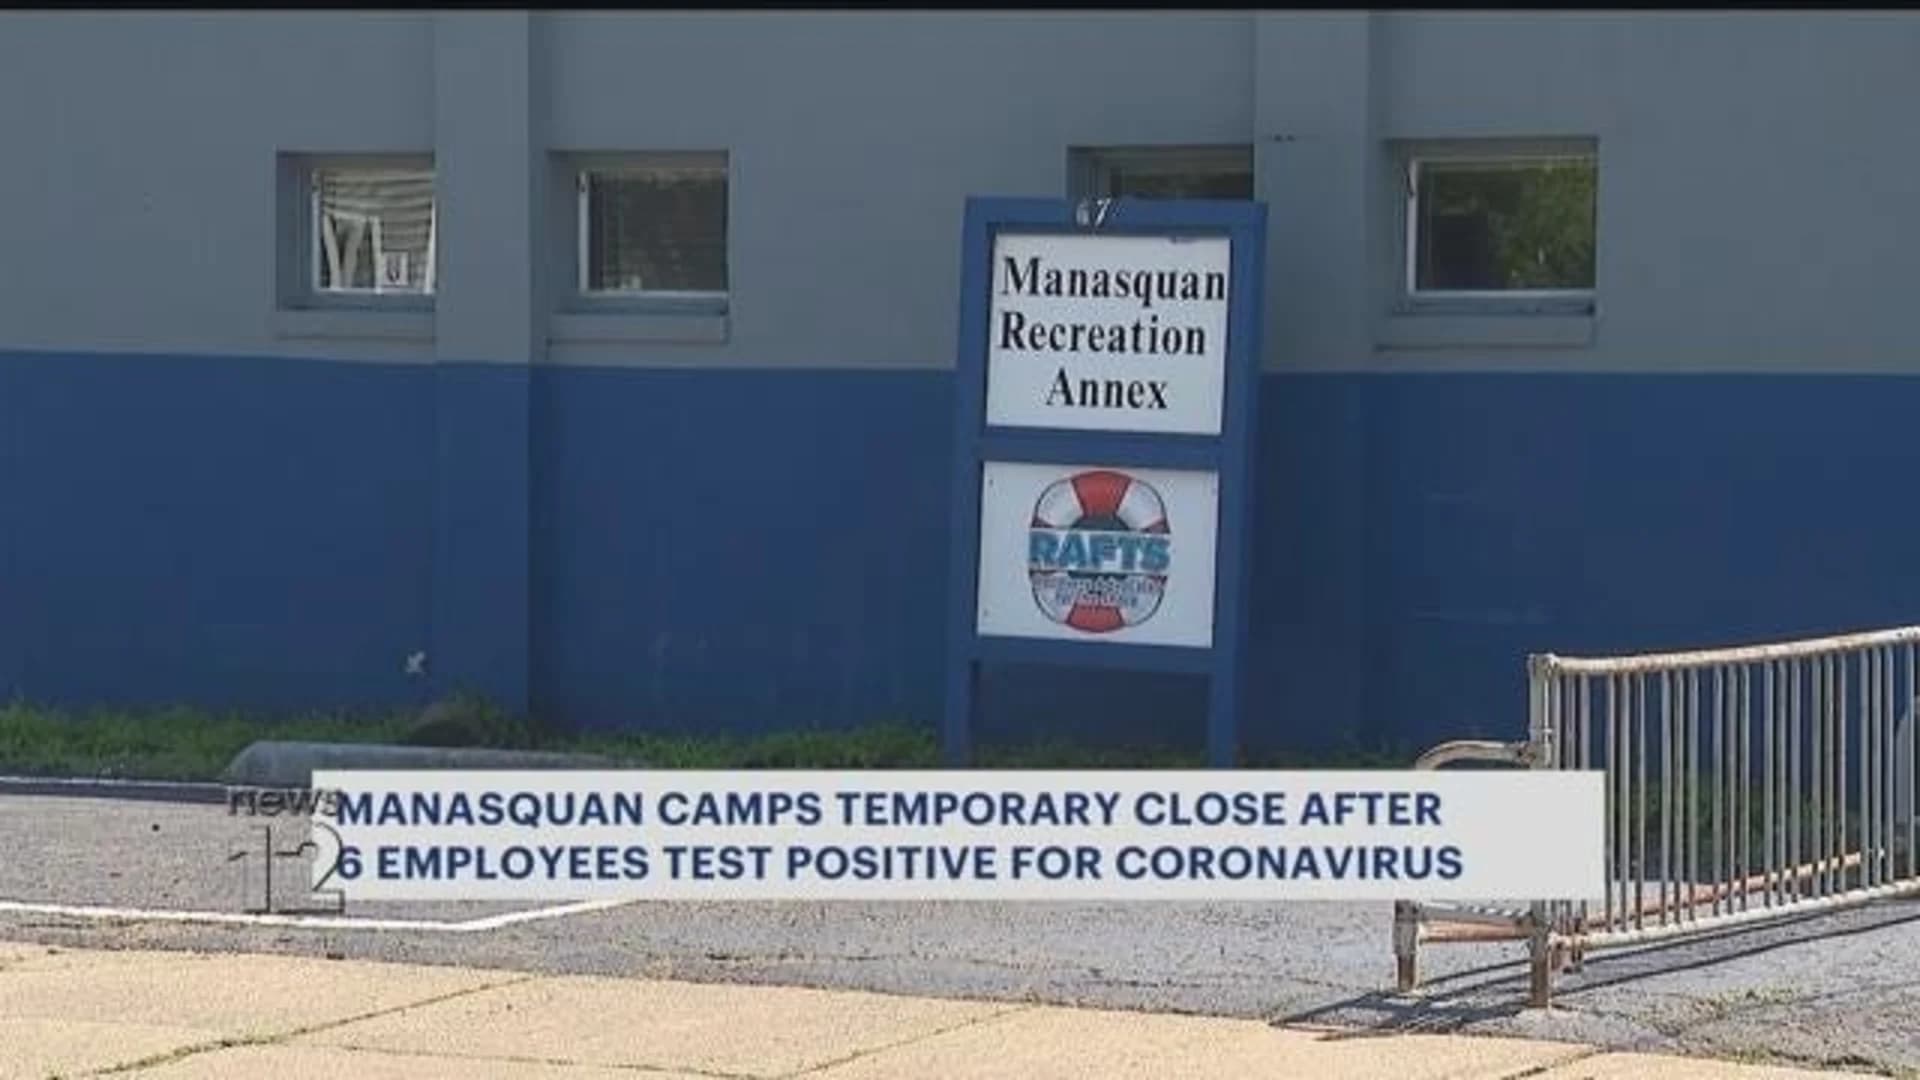 Manasquan recreation camps temporarily shut down after 6 employees test positive for coronavirus